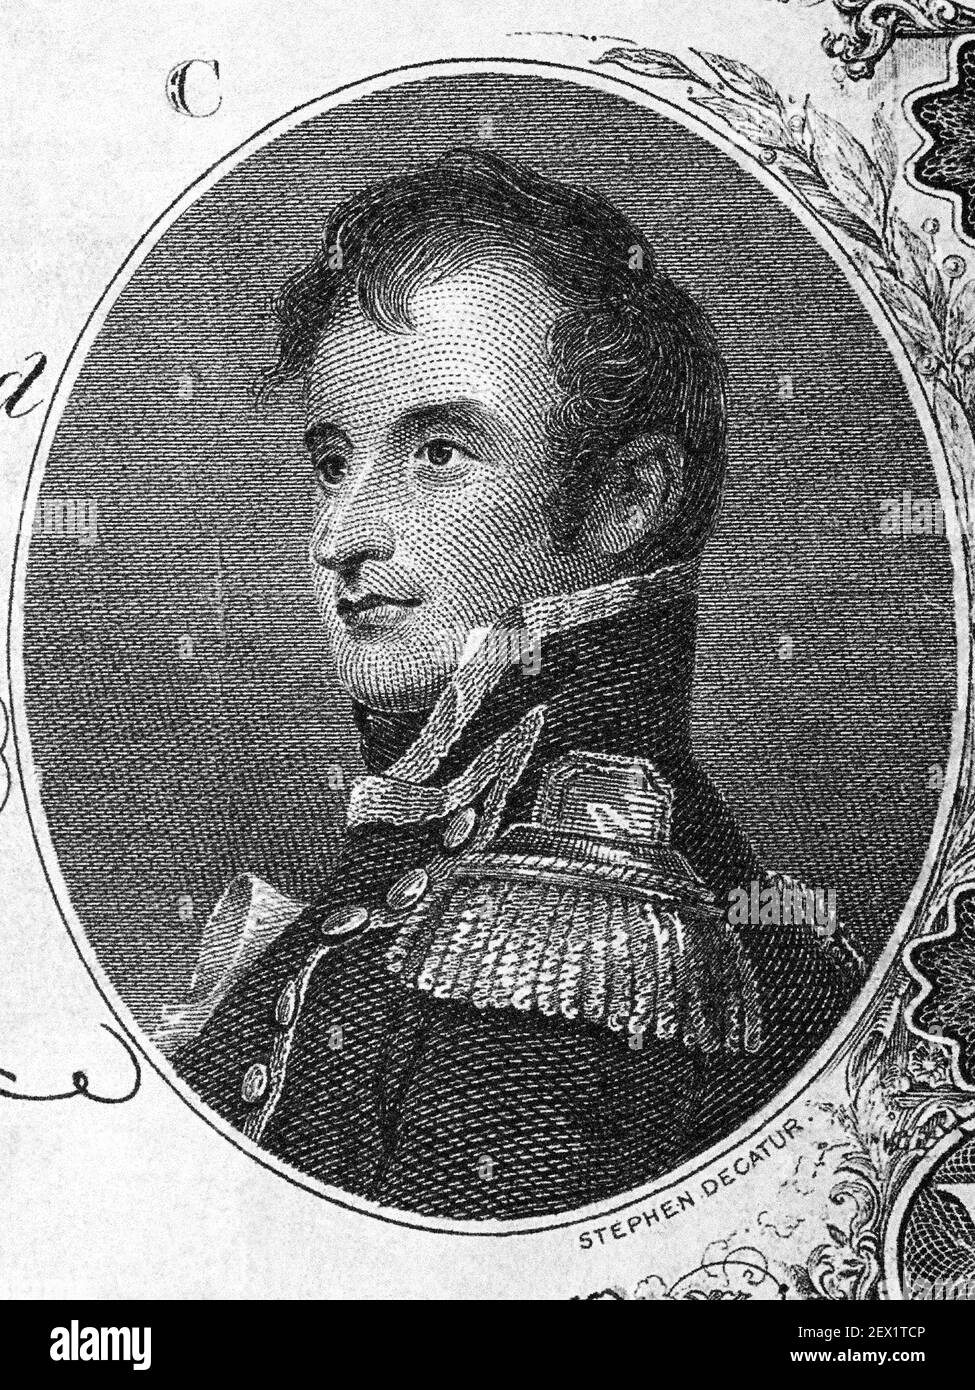 Stephen Decatur a portrait from old American money Stock Photo